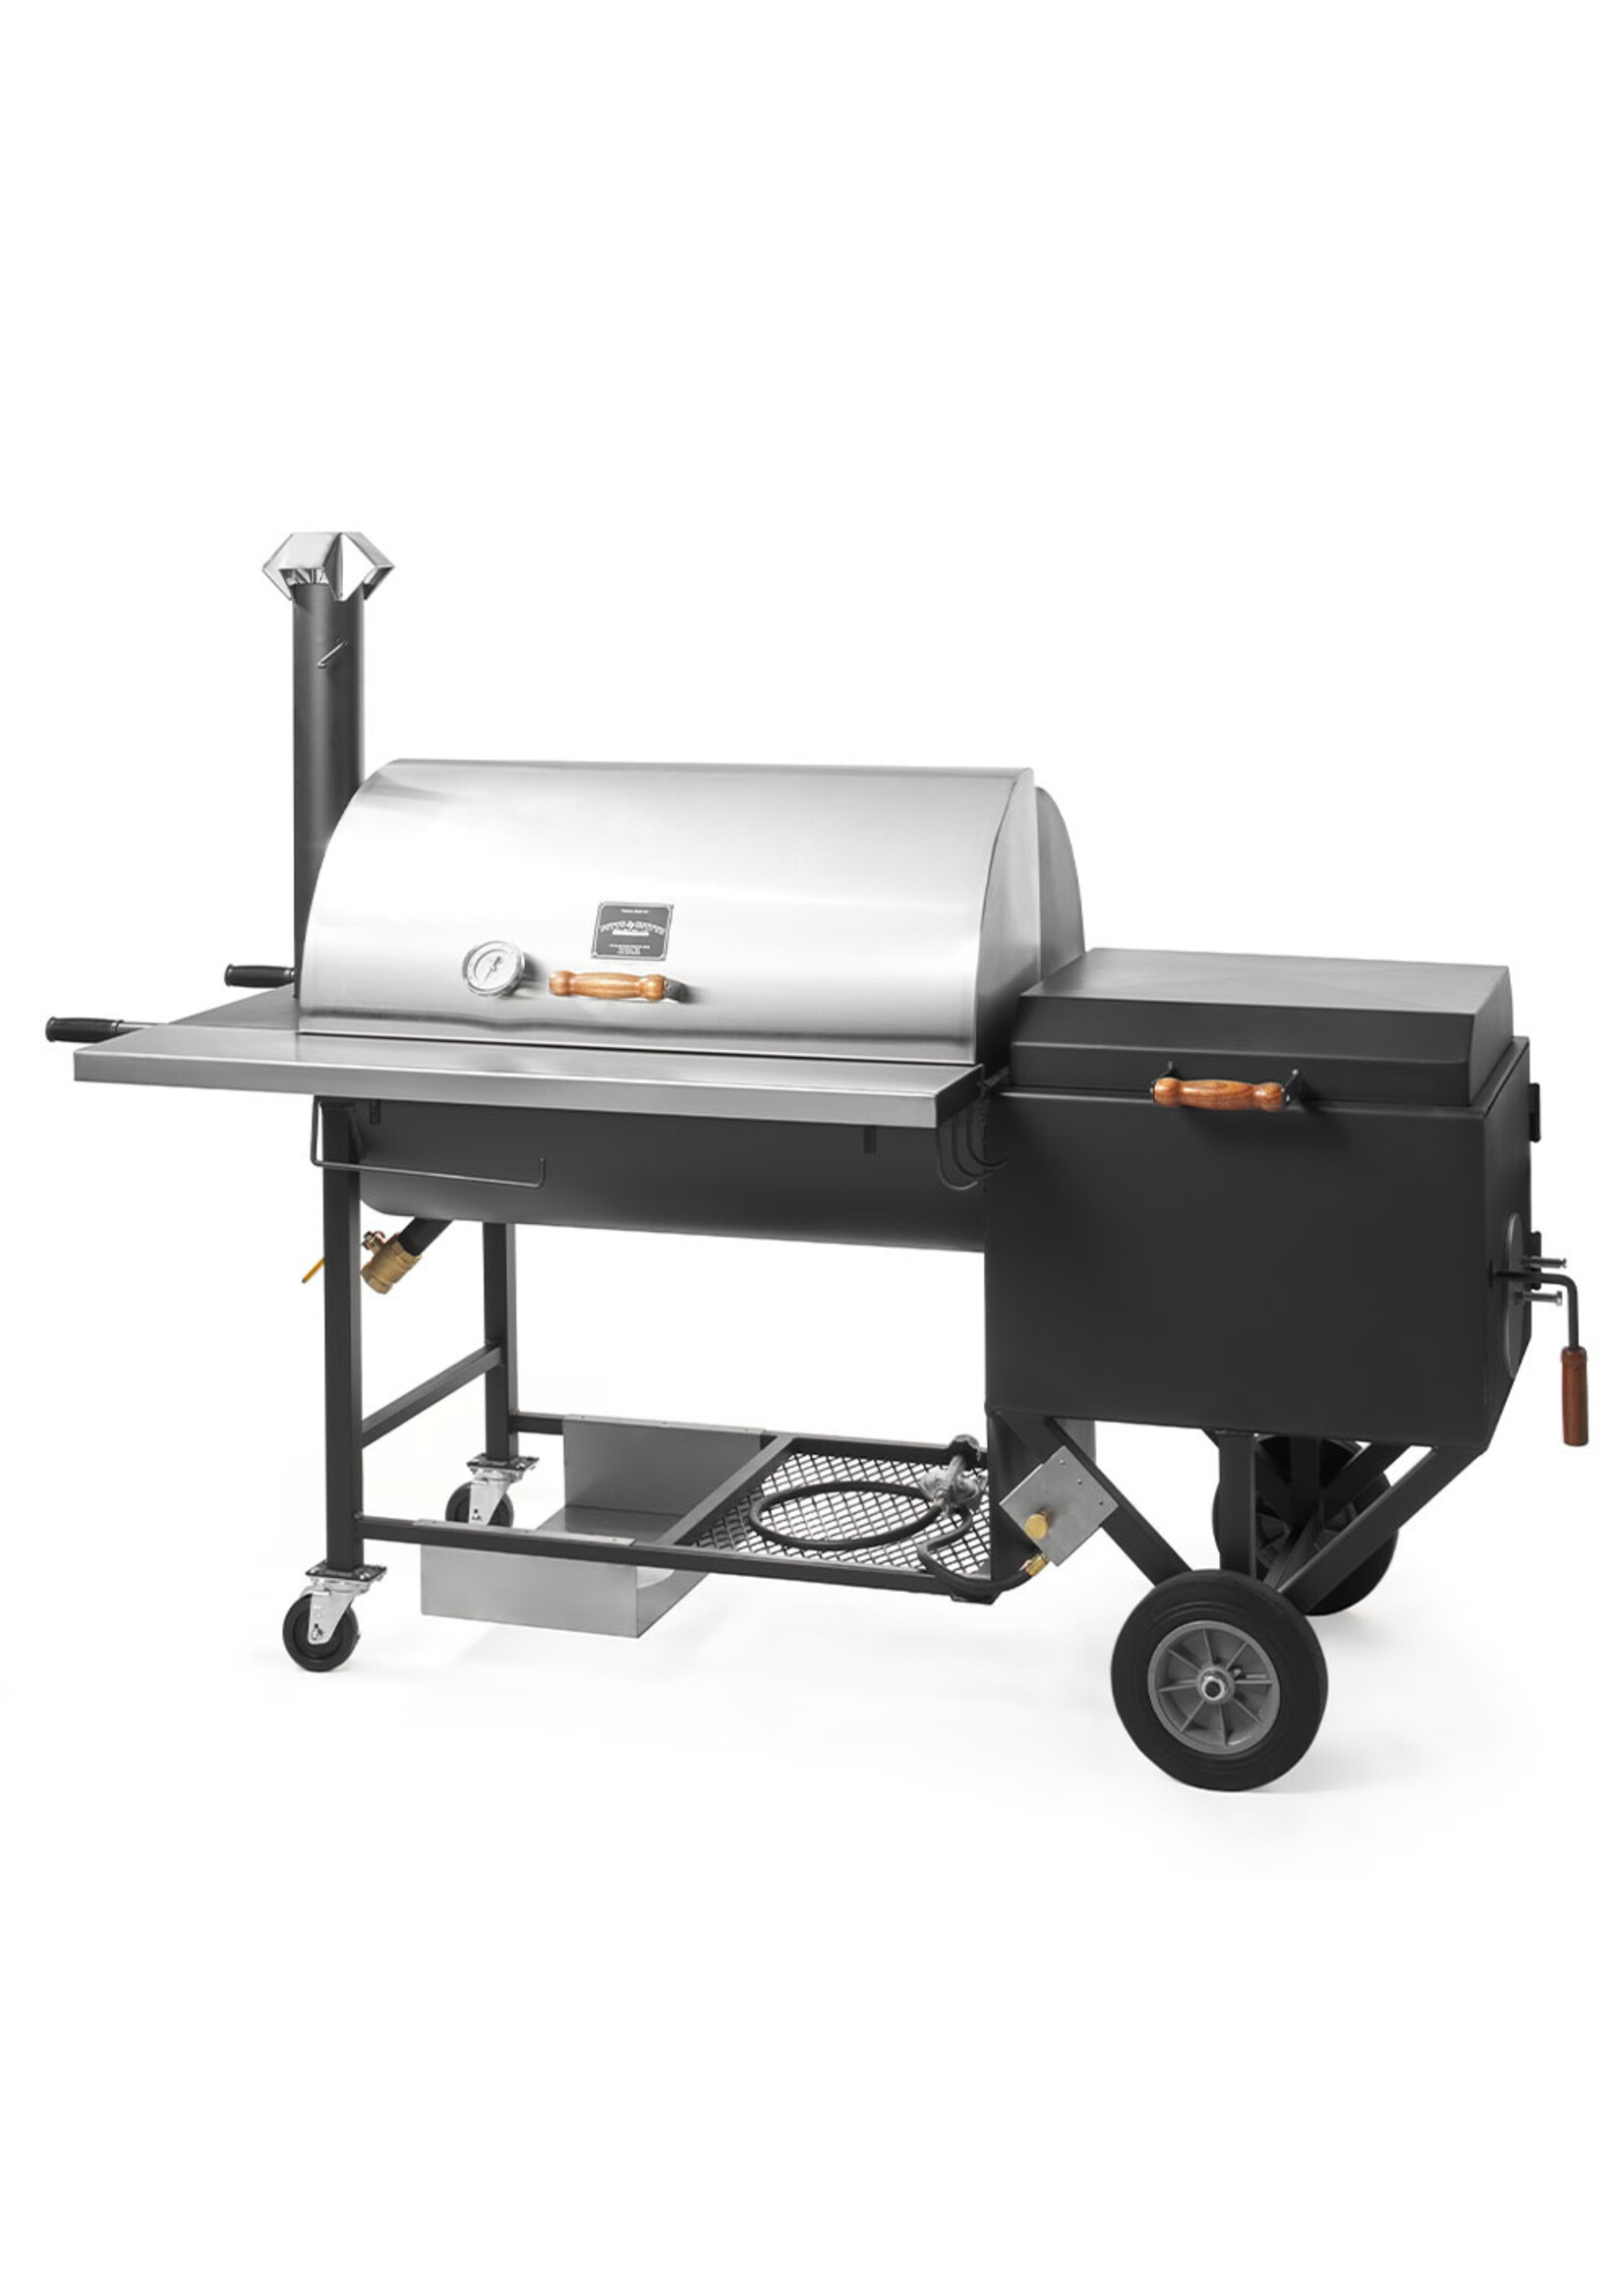 Pitts & Spitts Pitts & Spitts Ultimate Smoker Pit 24x48"